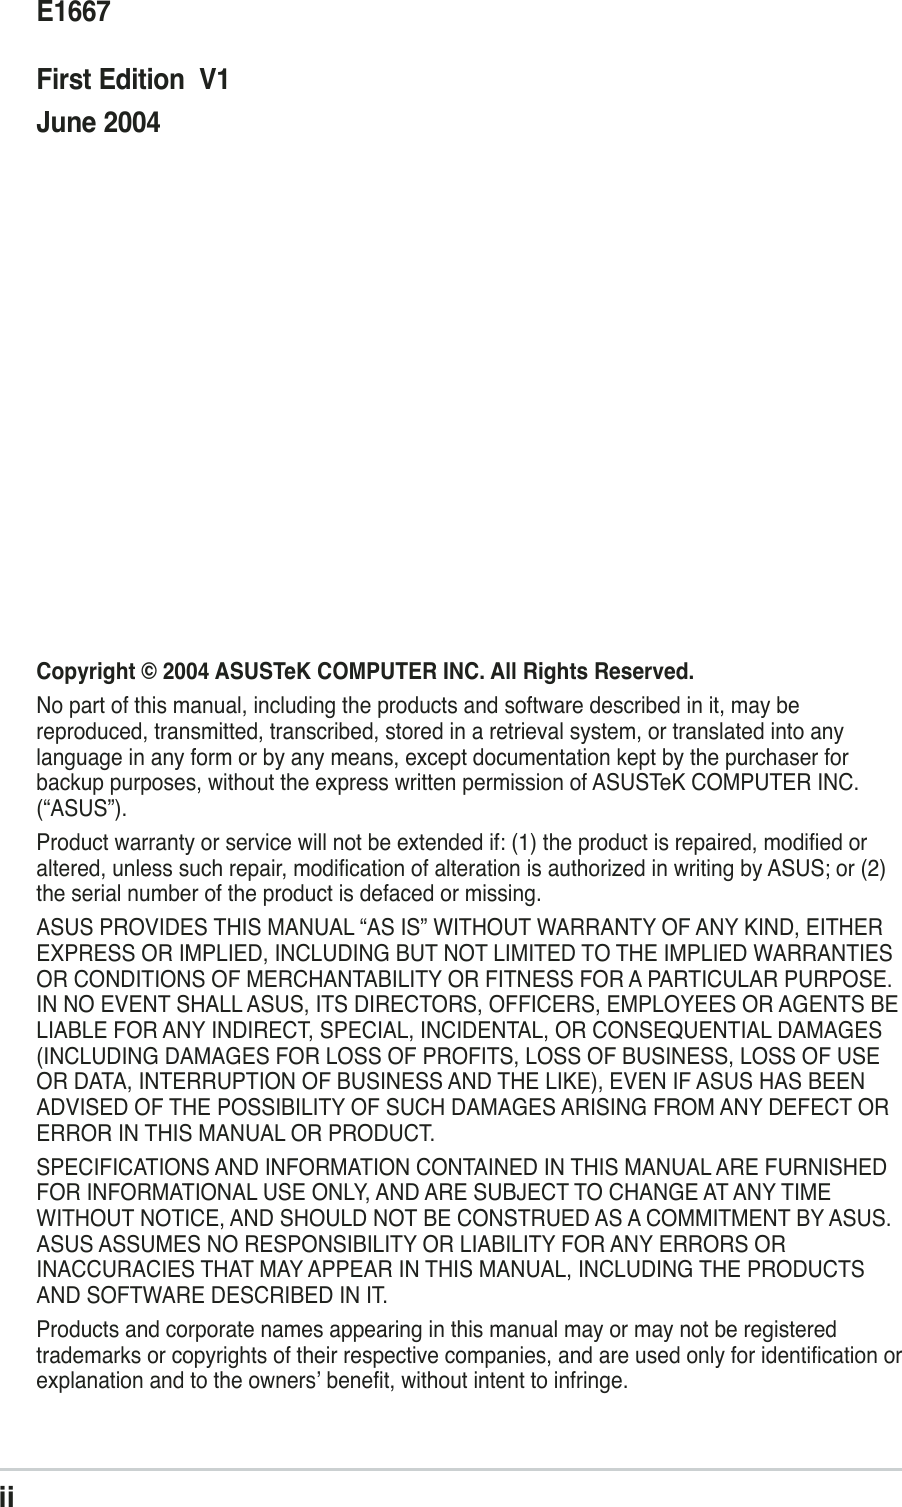 iiChecklistCopyright © 2004 ASUSTeK COMPUTER INC. All Rights Reserved.No part of this manual, including the products and software described in it, may bereproduced, transmitted, transcribed, stored in a retrieval system, or translated into anylanguage in any form or by any means, except documentation kept by the purchaser forbackup purposes, without the express written permission of ASUSTeK COMPUTER INC.(“ASUS”).Product warranty or service will not be extended if: (1) the product is repaired, modified oraltered, unless such repair, modification of alteration is authorized in writing by ASUS; or (2)the serial number of the product is defaced or missing.ASUS PROVIDES THIS MANUAL “AS IS” WITHOUT WARRANTY OF ANY KIND, EITHEREXPRESS OR IMPLIED, INCLUDING BUT NOT LIMITED TO THE IMPLIED WARRANTIESOR CONDITIONS OF MERCHANTABILITY OR FITNESS FOR A PARTICULAR PURPOSE.IN NO EVENT SHALL ASUS, ITS DIRECTORS, OFFICERS, EMPLOYEES OR AGENTS BELIABLE FOR ANY INDIRECT, SPECIAL, INCIDENTAL, OR CONSEQUENTIAL DAMAGES(INCLUDING DAMAGES FOR LOSS OF PROFITS, LOSS OF BUSINESS, LOSS OF USEOR DATA, INTERRUPTION OF BUSINESS AND THE LIKE), EVEN IF ASUS HAS BEENADVISED OF THE POSSIBILITY OF SUCH DAMAGES ARISING FROM ANY DEFECT ORERROR IN THIS MANUAL OR PRODUCT.SPECIFICATIONS AND INFORMATION CONTAINED IN THIS MANUAL ARE FURNISHEDFOR INFORMATIONAL USE ONLY, AND ARE SUBJECT TO CHANGE AT ANY TIMEWITHOUT NOTICE, AND SHOULD NOT BE CONSTRUED AS A COMMITMENT BY ASUS.ASUS ASSUMES NO RESPONSIBILITY OR LIABILITY FOR ANY ERRORS ORINACCURACIES THAT MAY APPEAR IN THIS MANUAL, INCLUDING THE PRODUCTSAND SOFTWARE DESCRIBED IN IT.Products and corporate names appearing in this manual may or may not be registeredtrademarks or copyrights of their respective companies, and are used only for identification orexplanation and to the owners’ benefit, without intent to infringe.E1667First Edition  V1June 2004